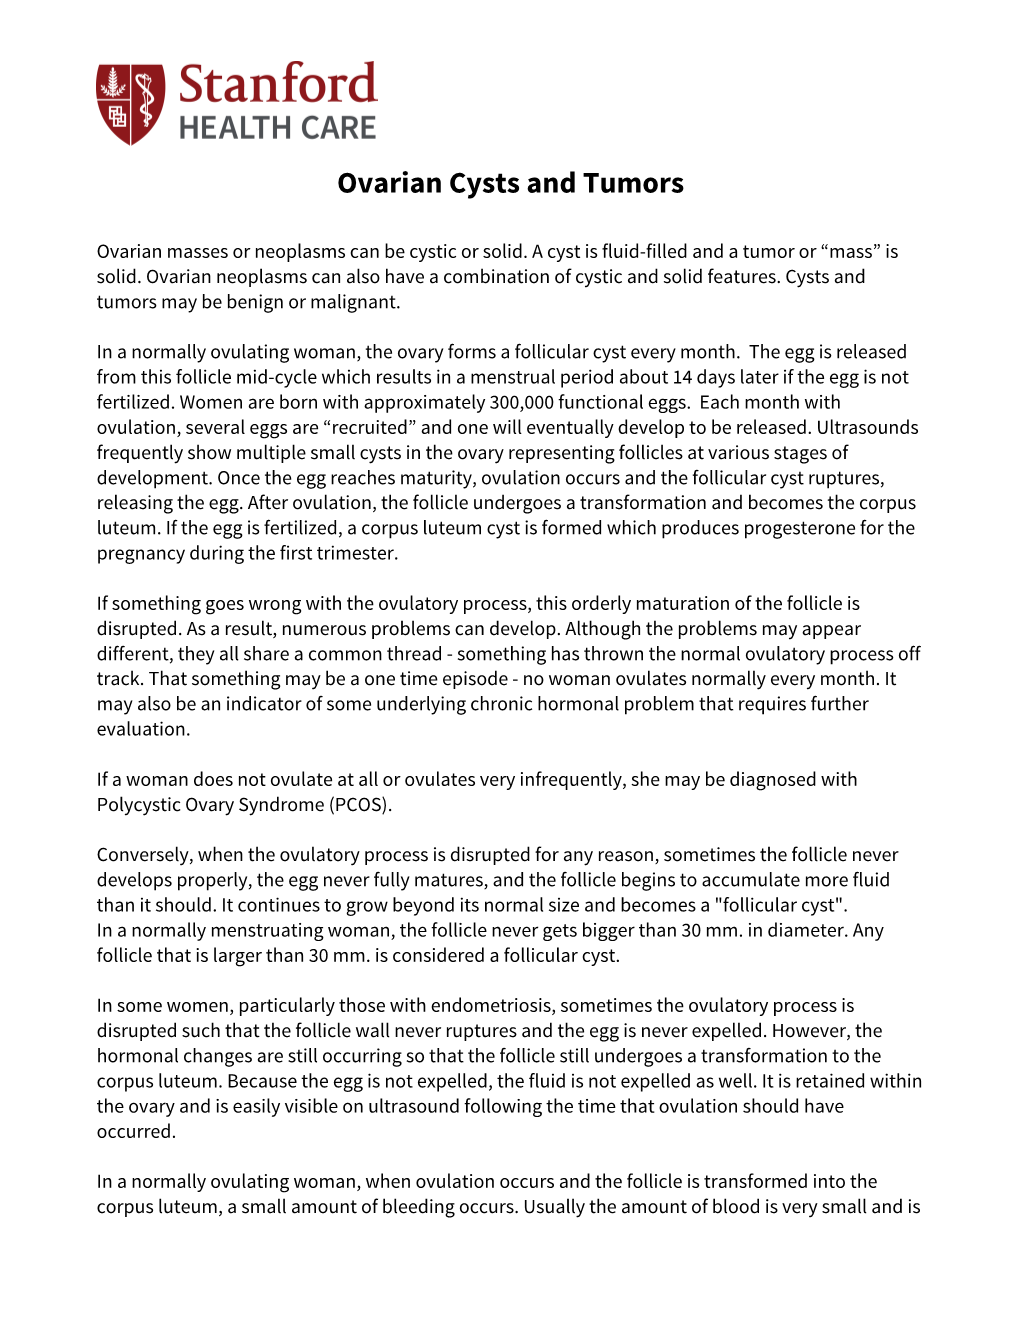 Ovarian Cysts and Tumors